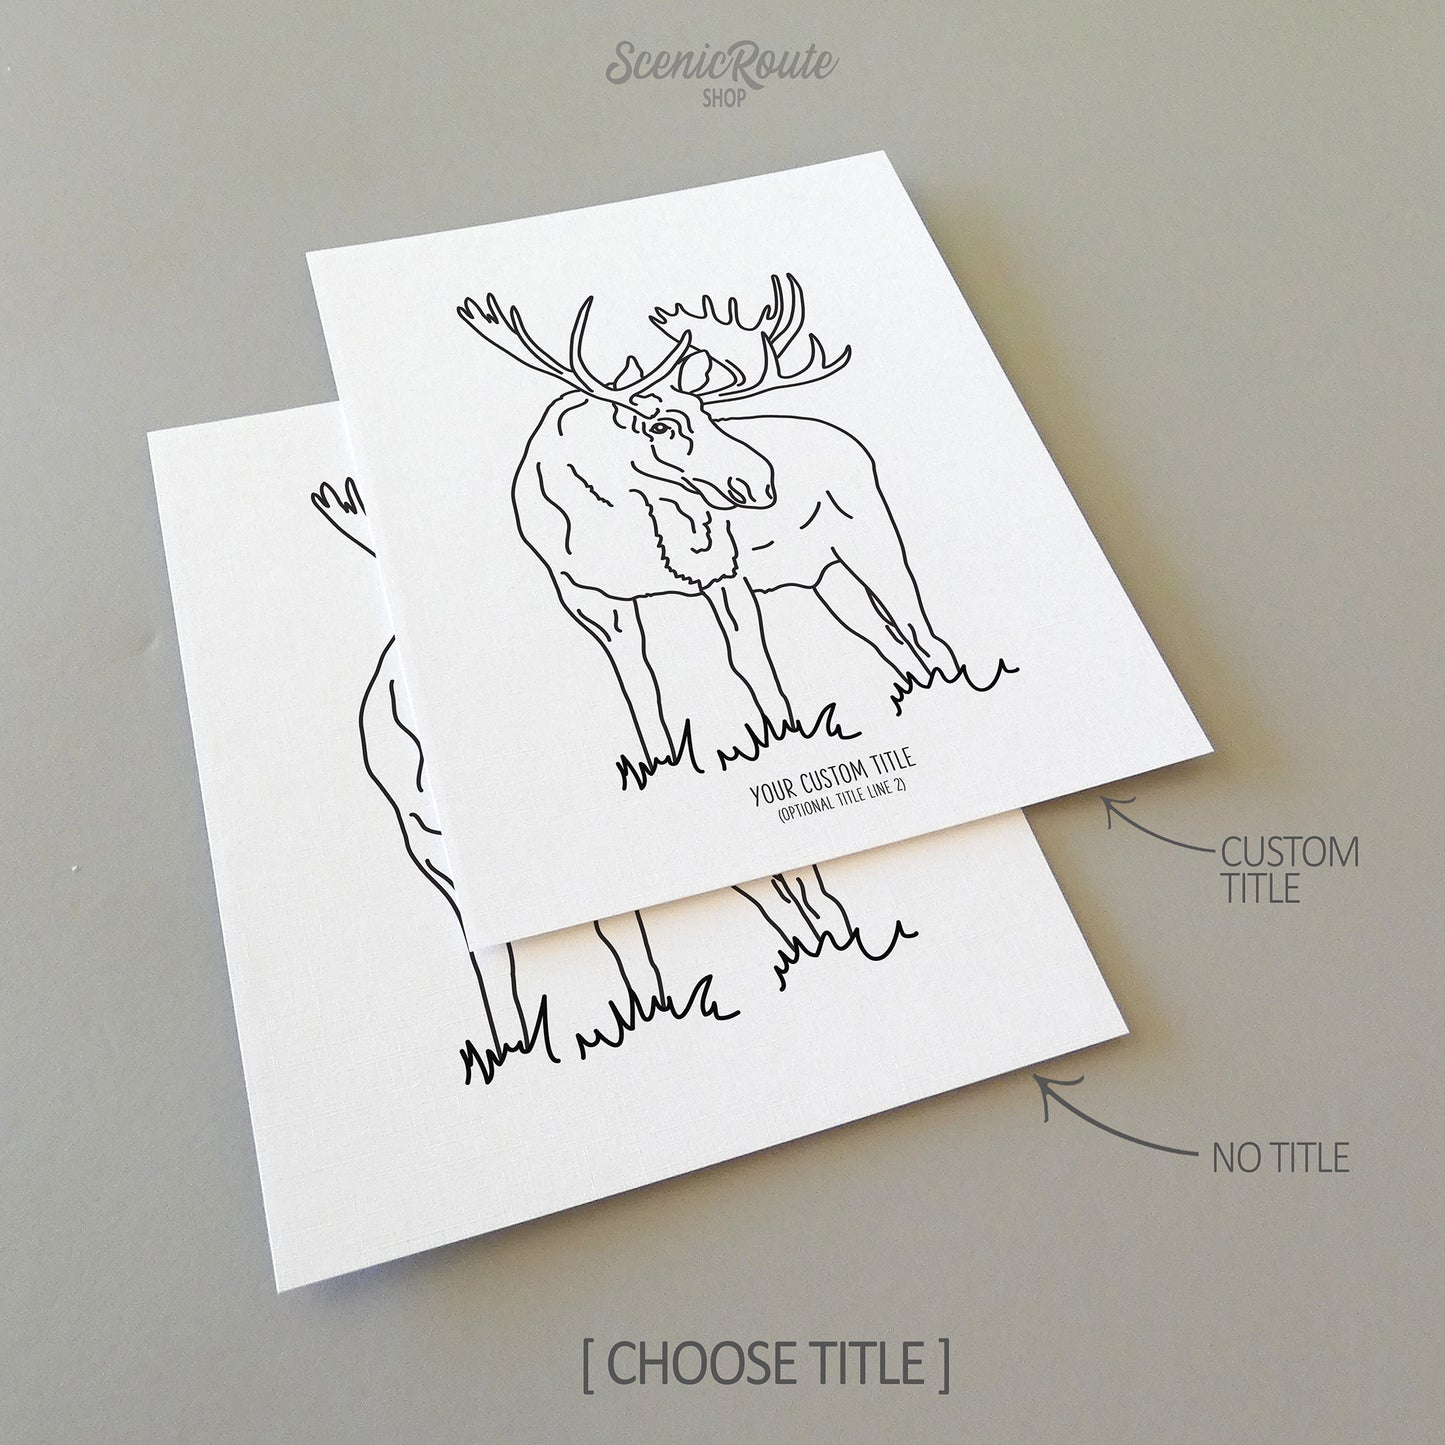 Two line art drawings of a Moose on white linen paper with a gray background.  The pieces are shown with “No Title” and “Custom Title” options for the available art print options.